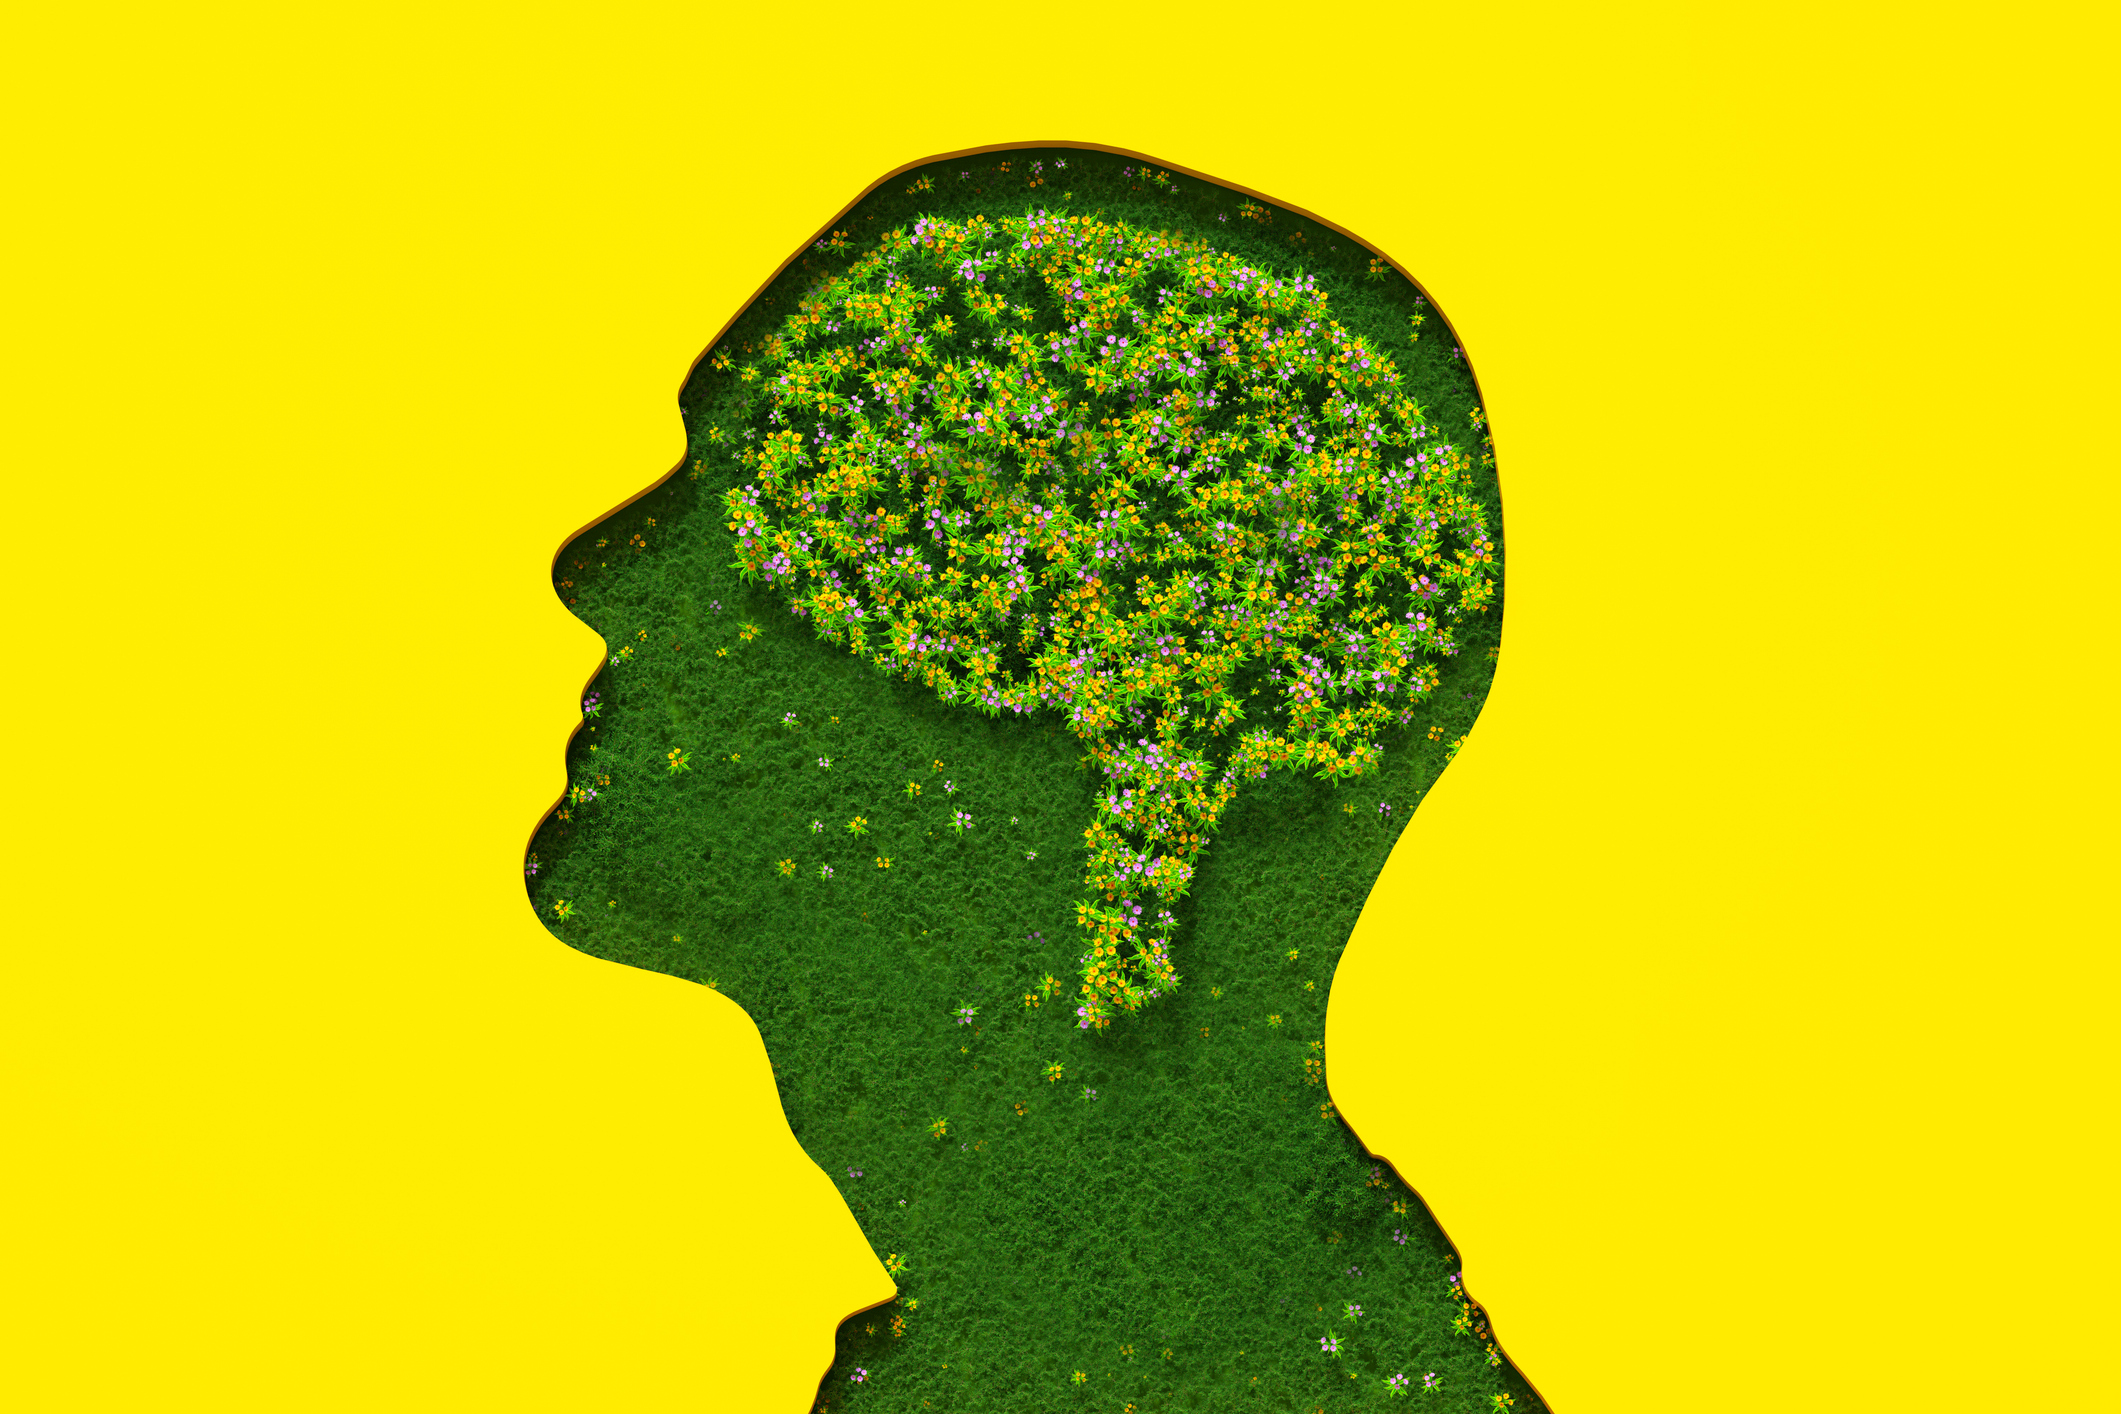 Flowers petals and leaves forming brain shape inside head silhouette made out of grass on yellow background.